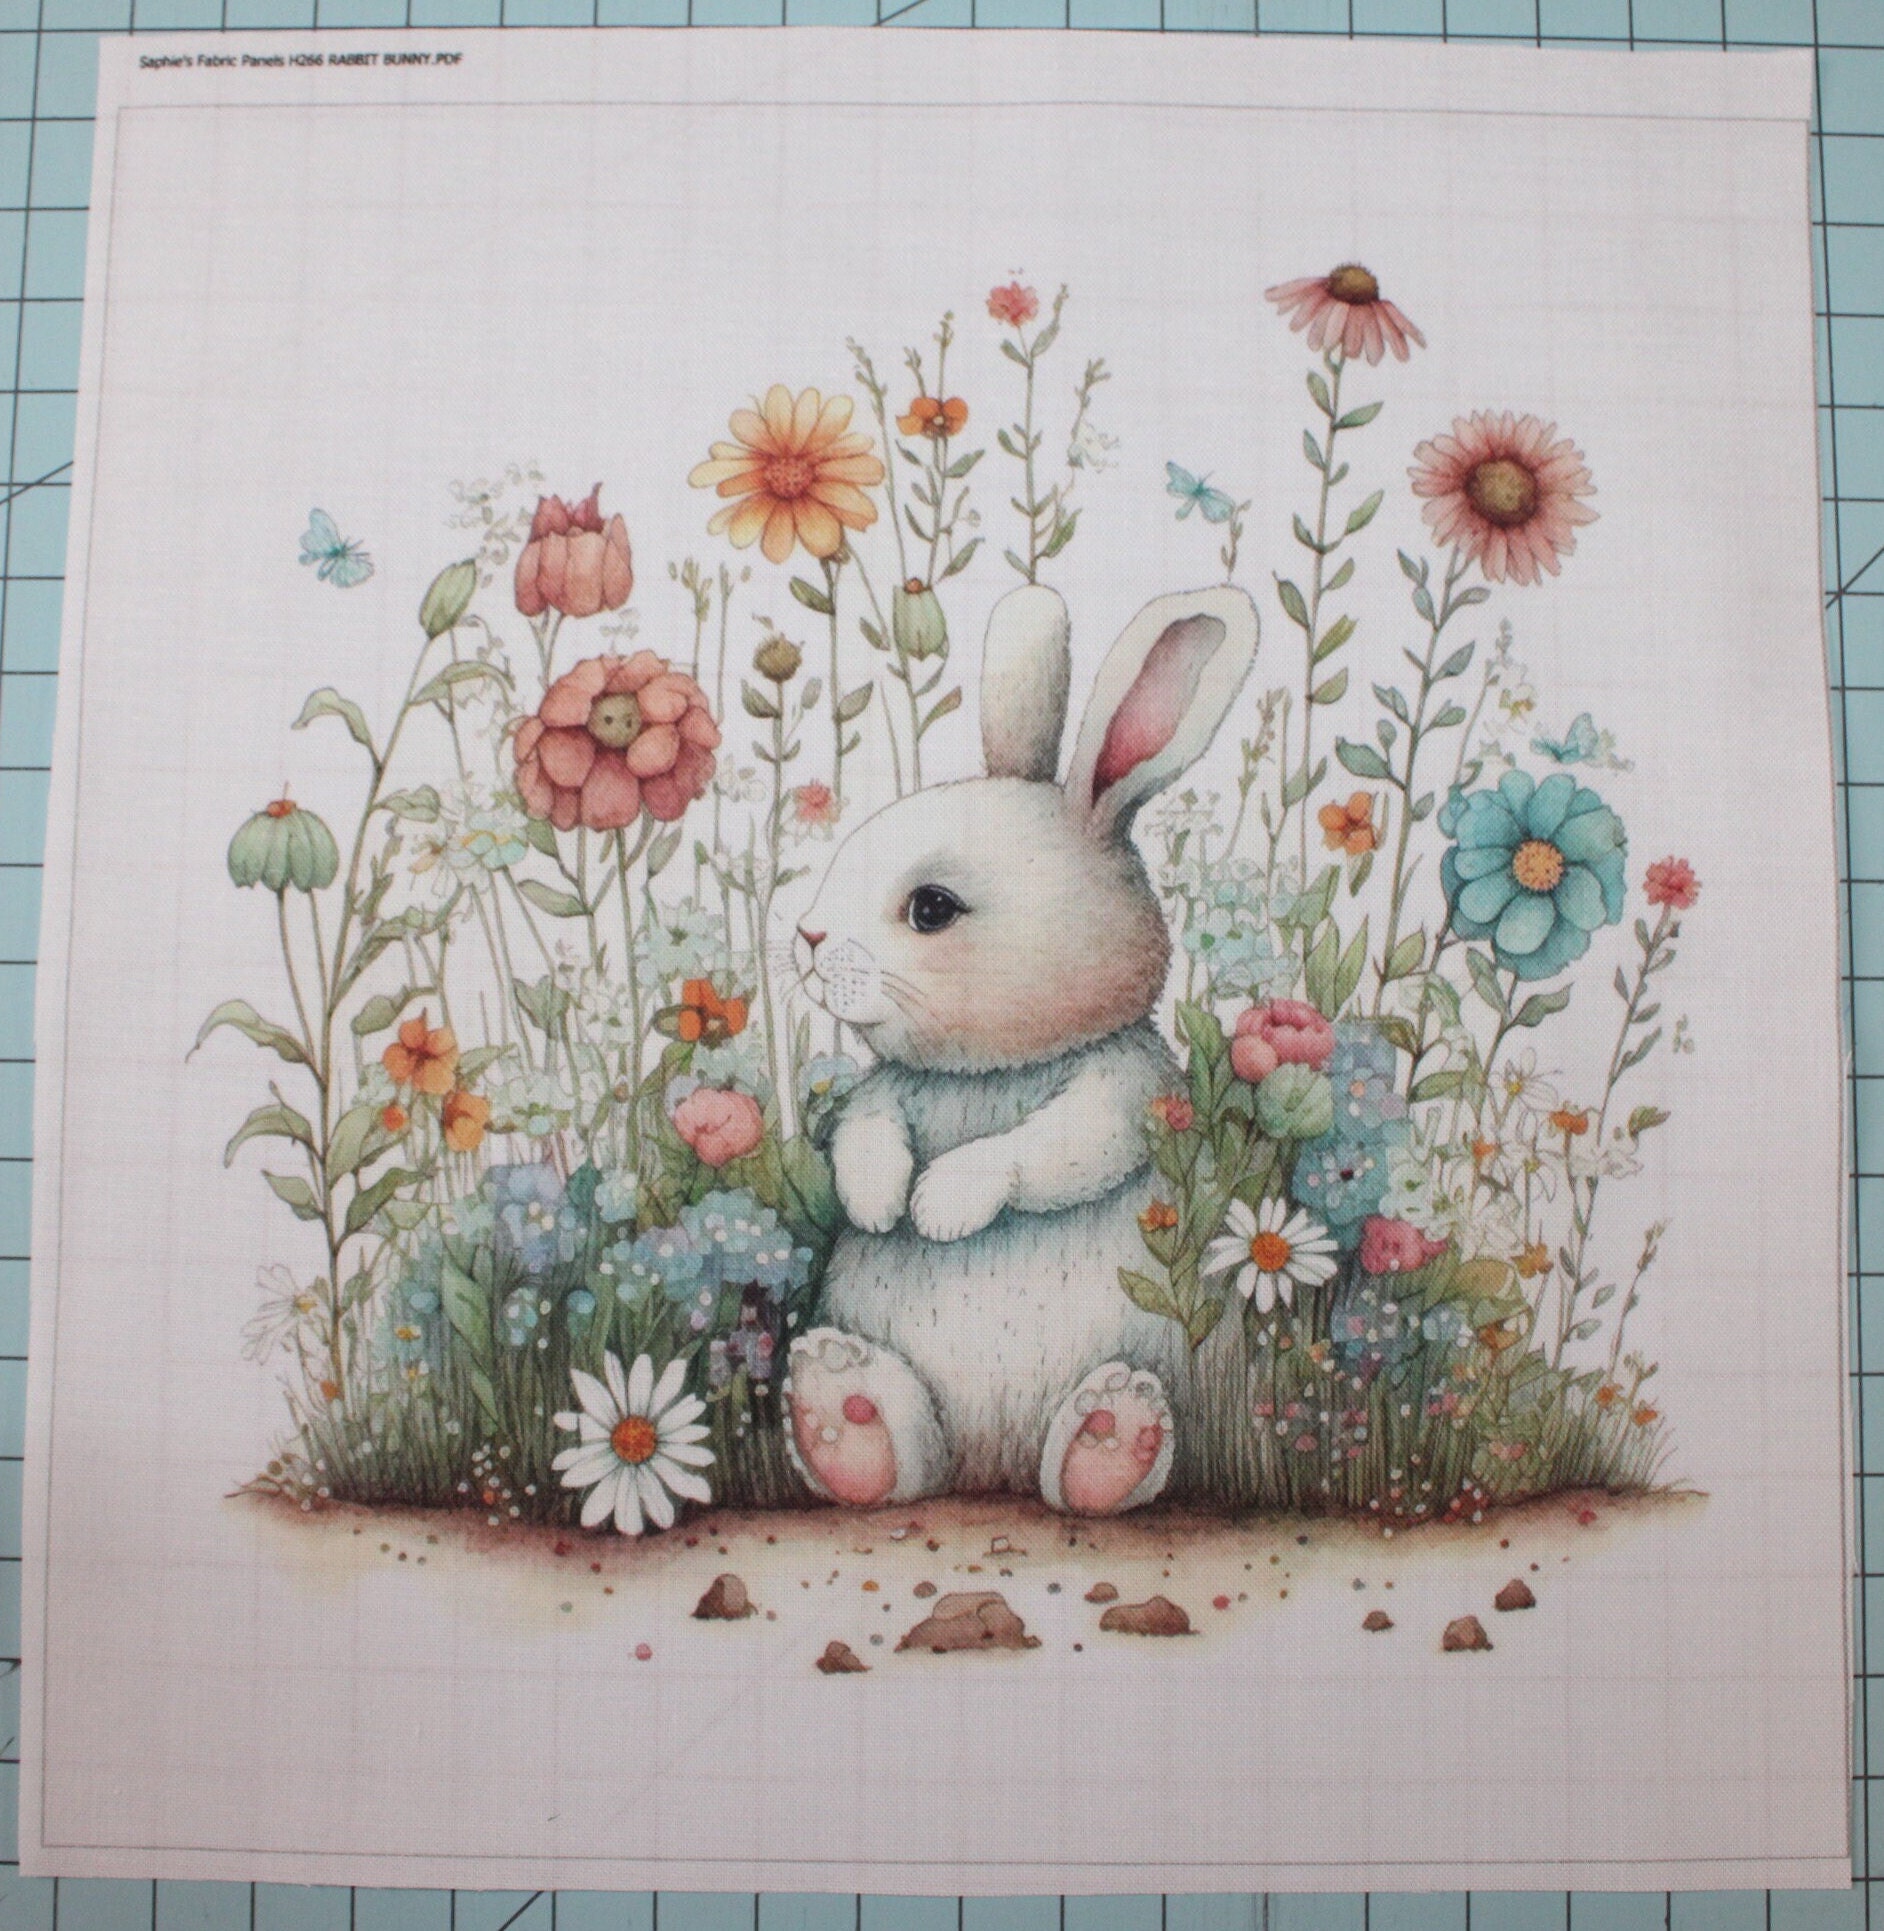 Bunnies Intertwined Baby Quilt Kit* – Quilting Fabric Supplier